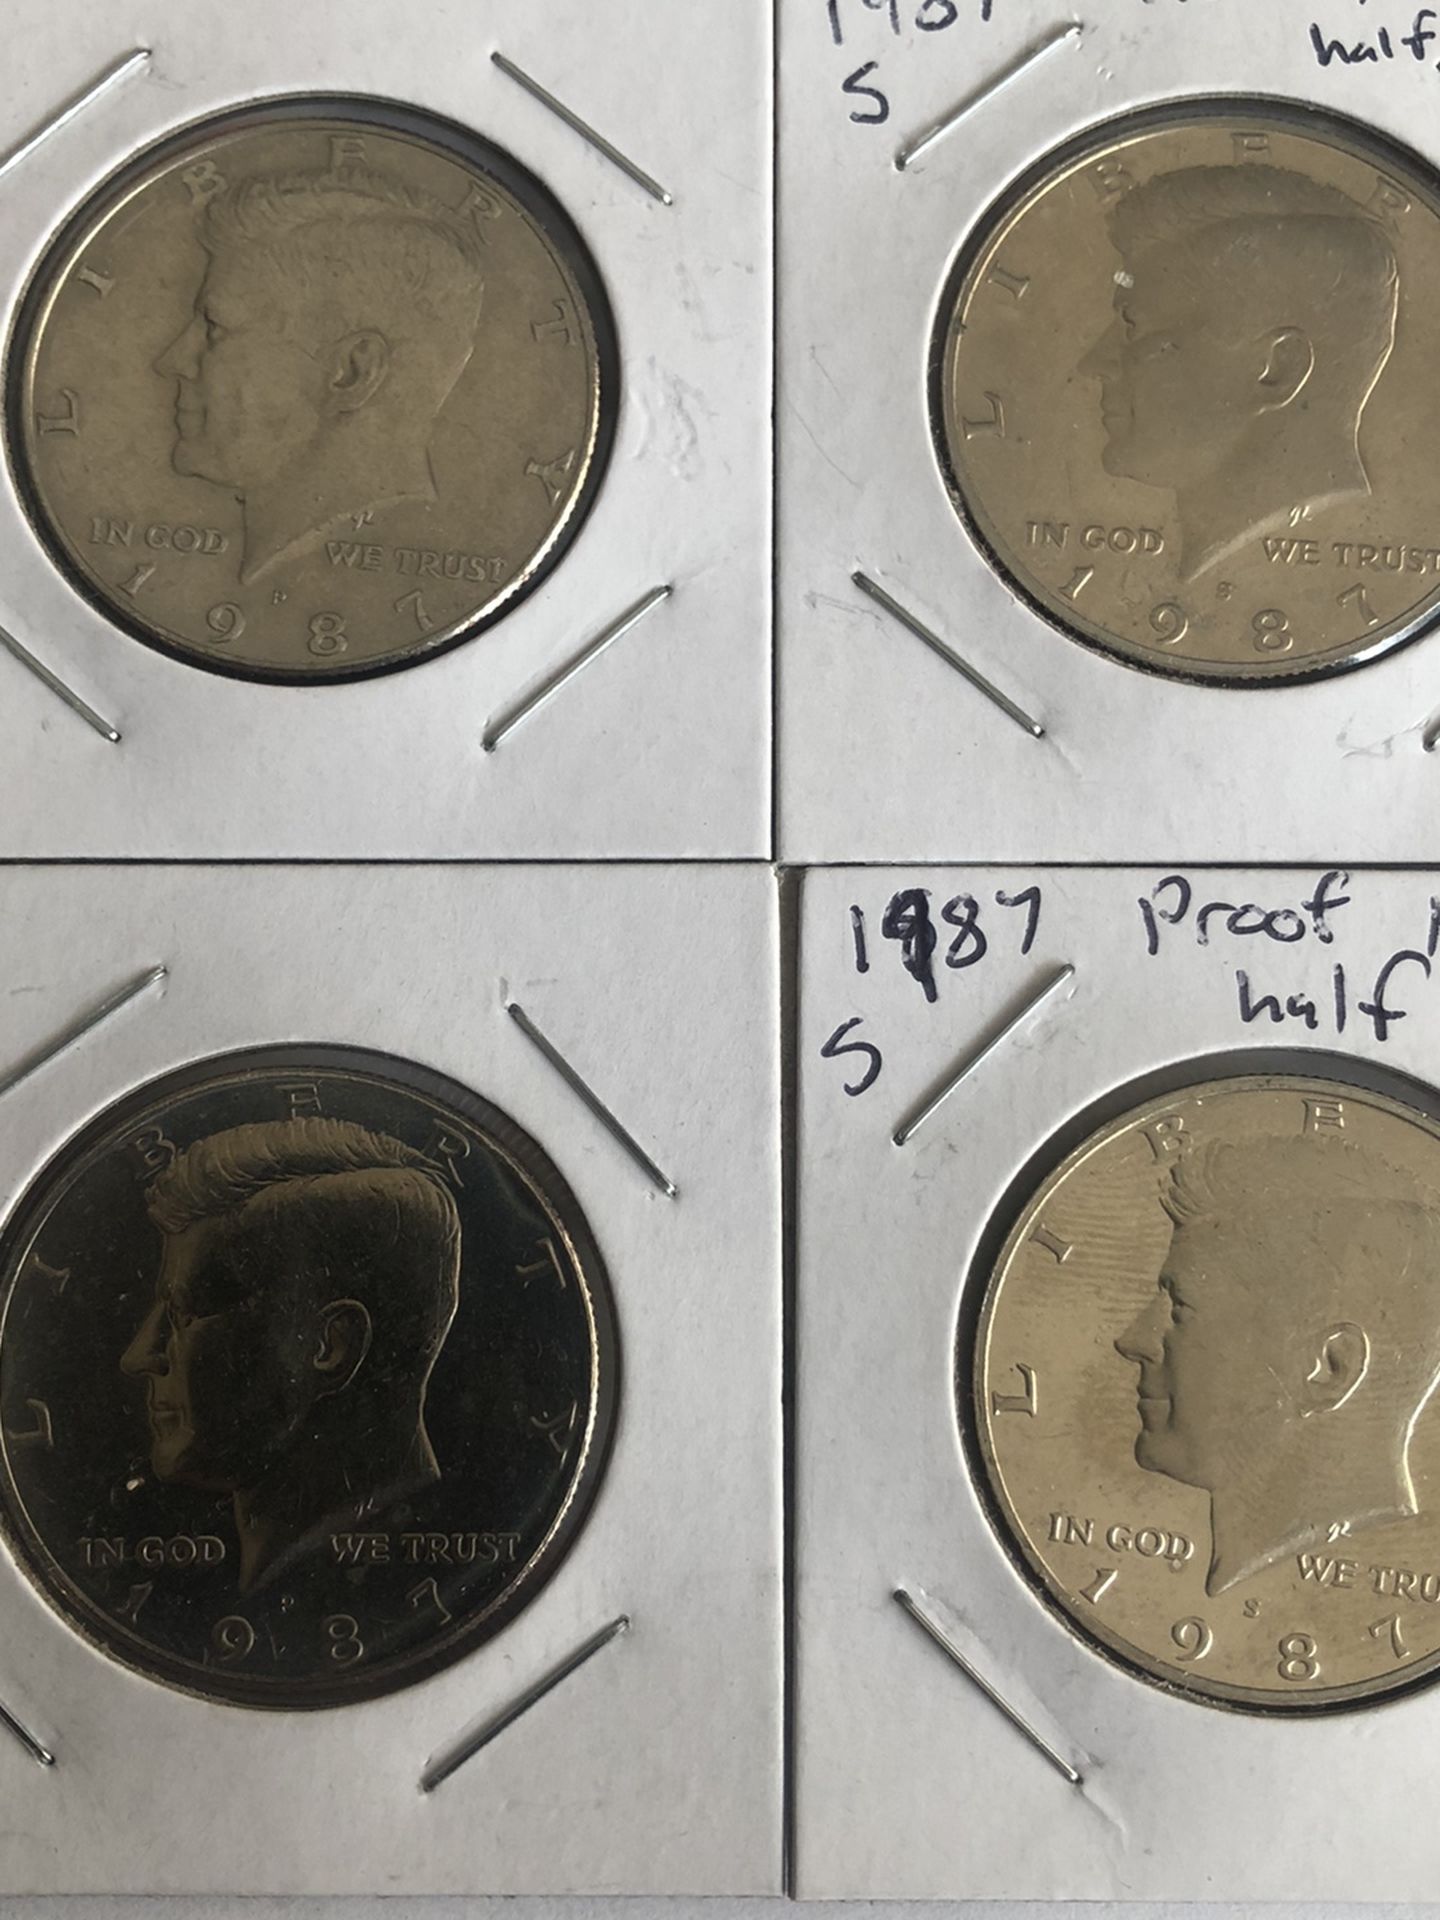 1987-P And 1987-S Kennedy half dollars